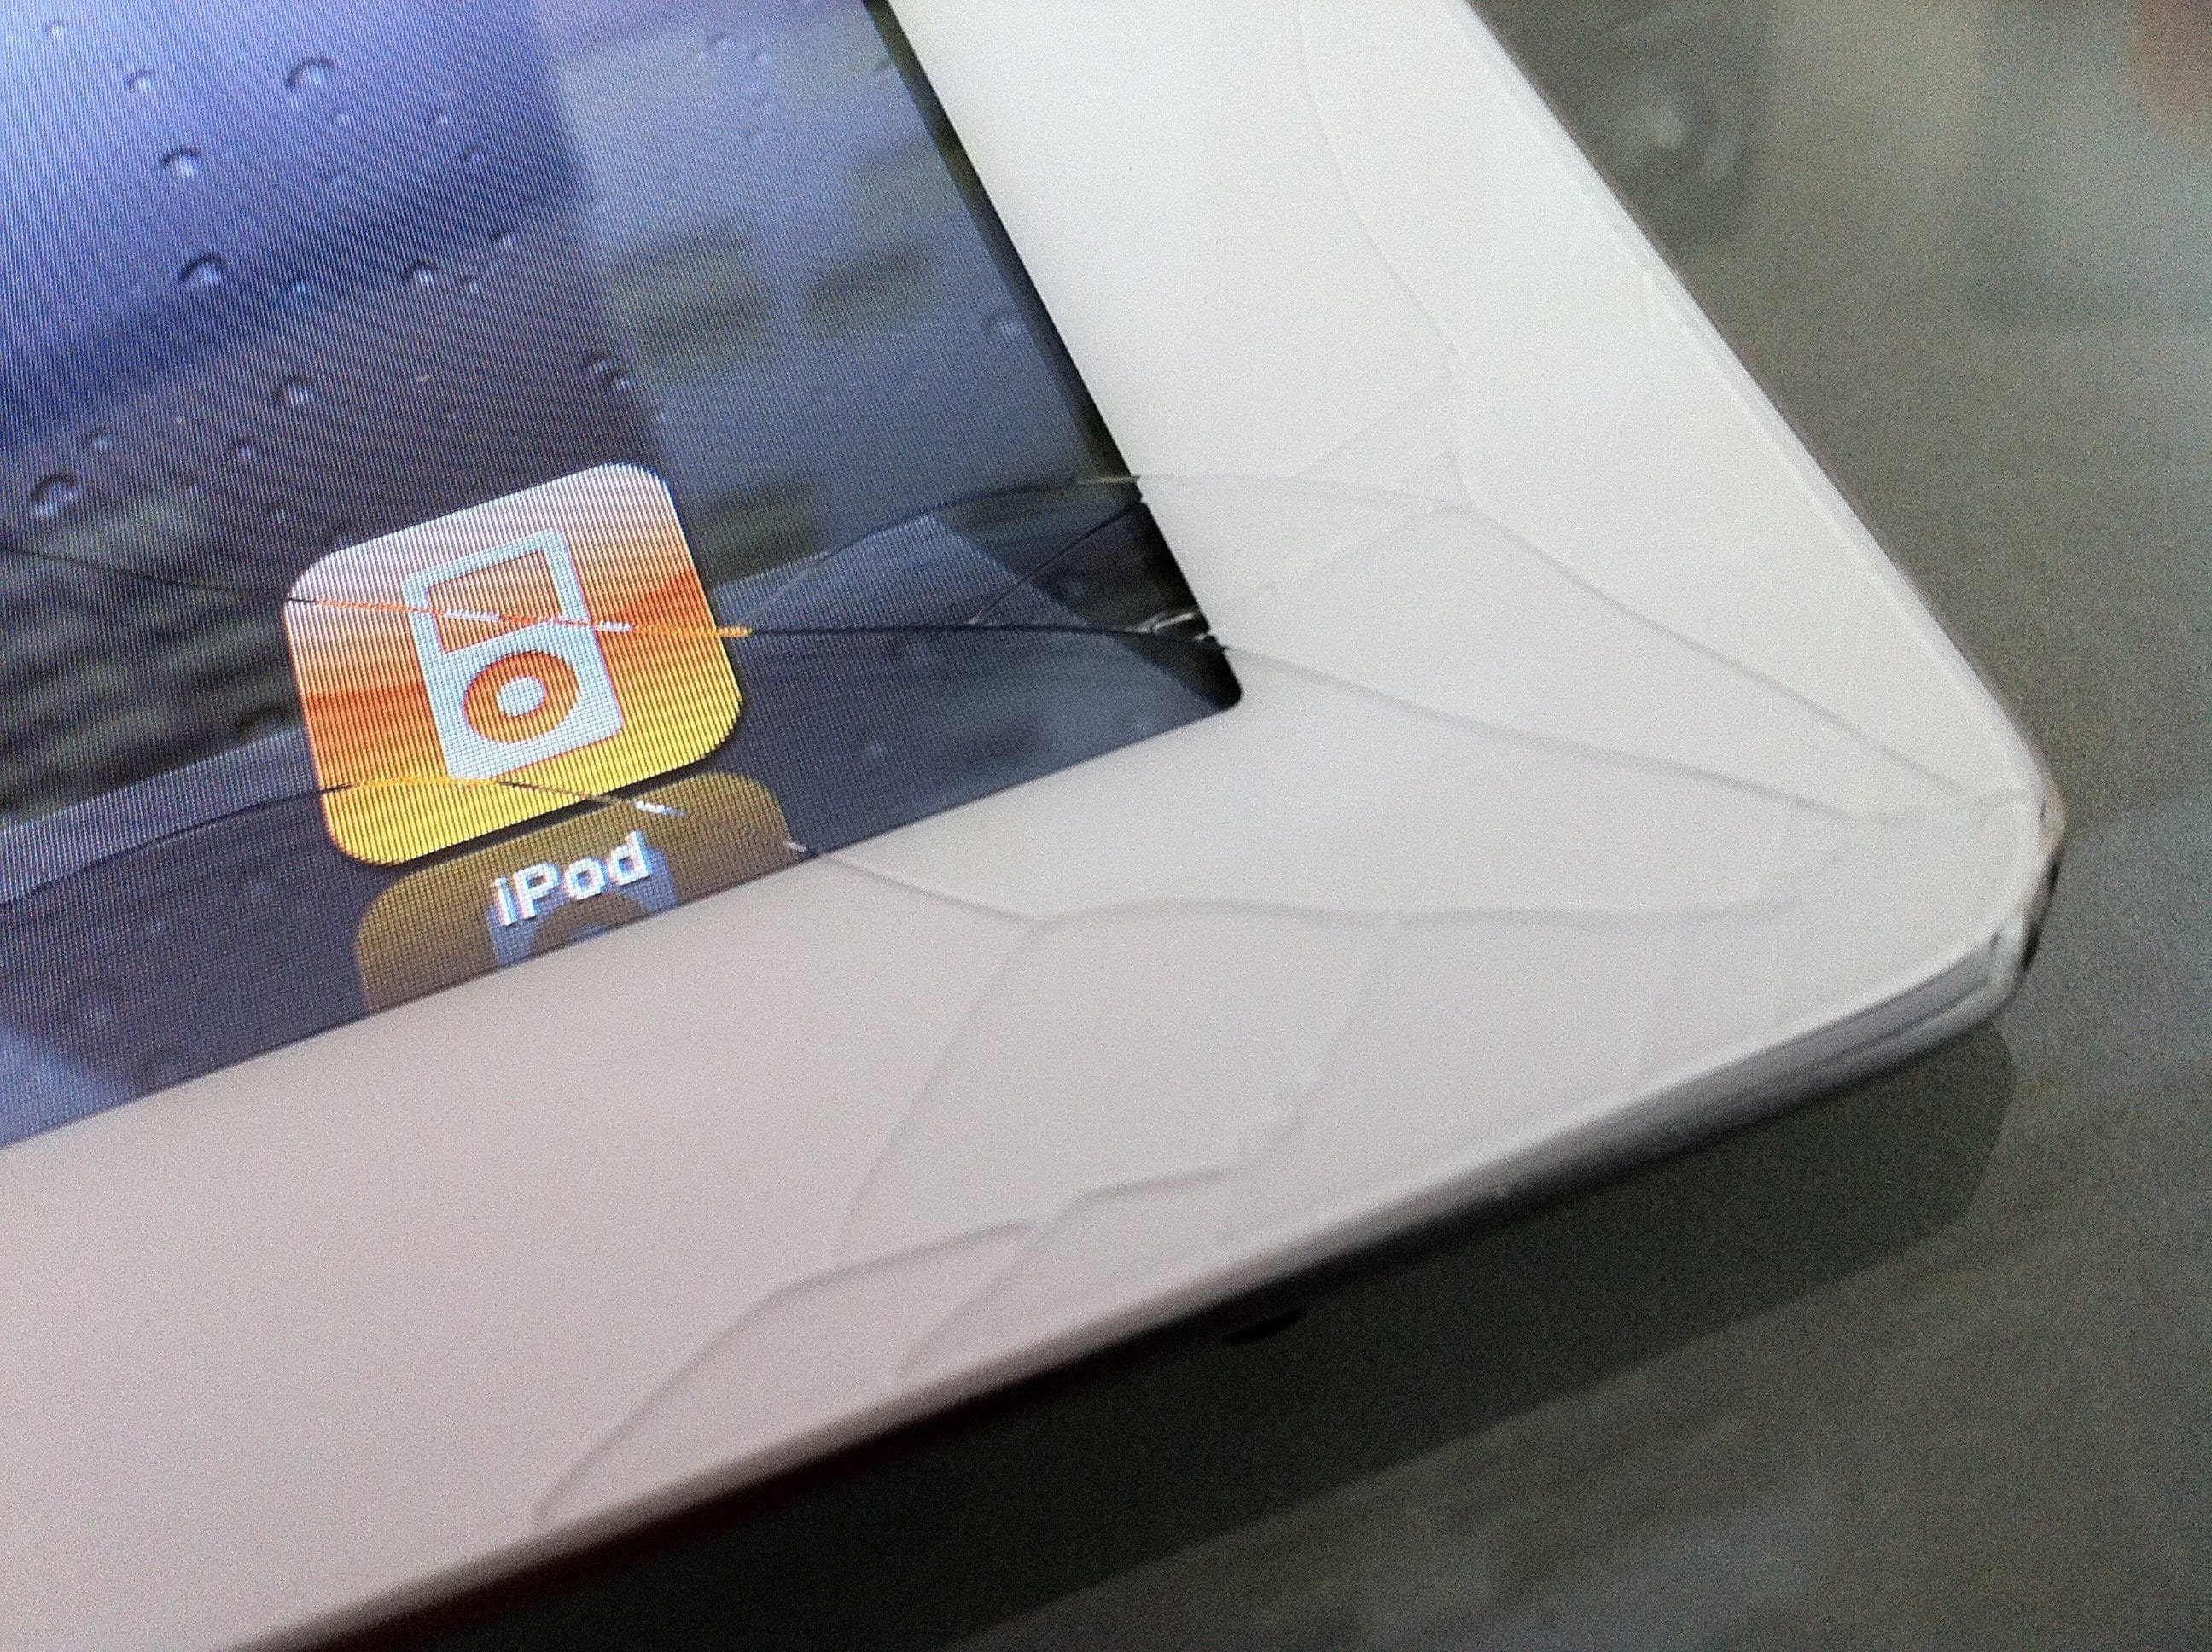 Does Applecare Cover Cracked Ipad 2 Screens